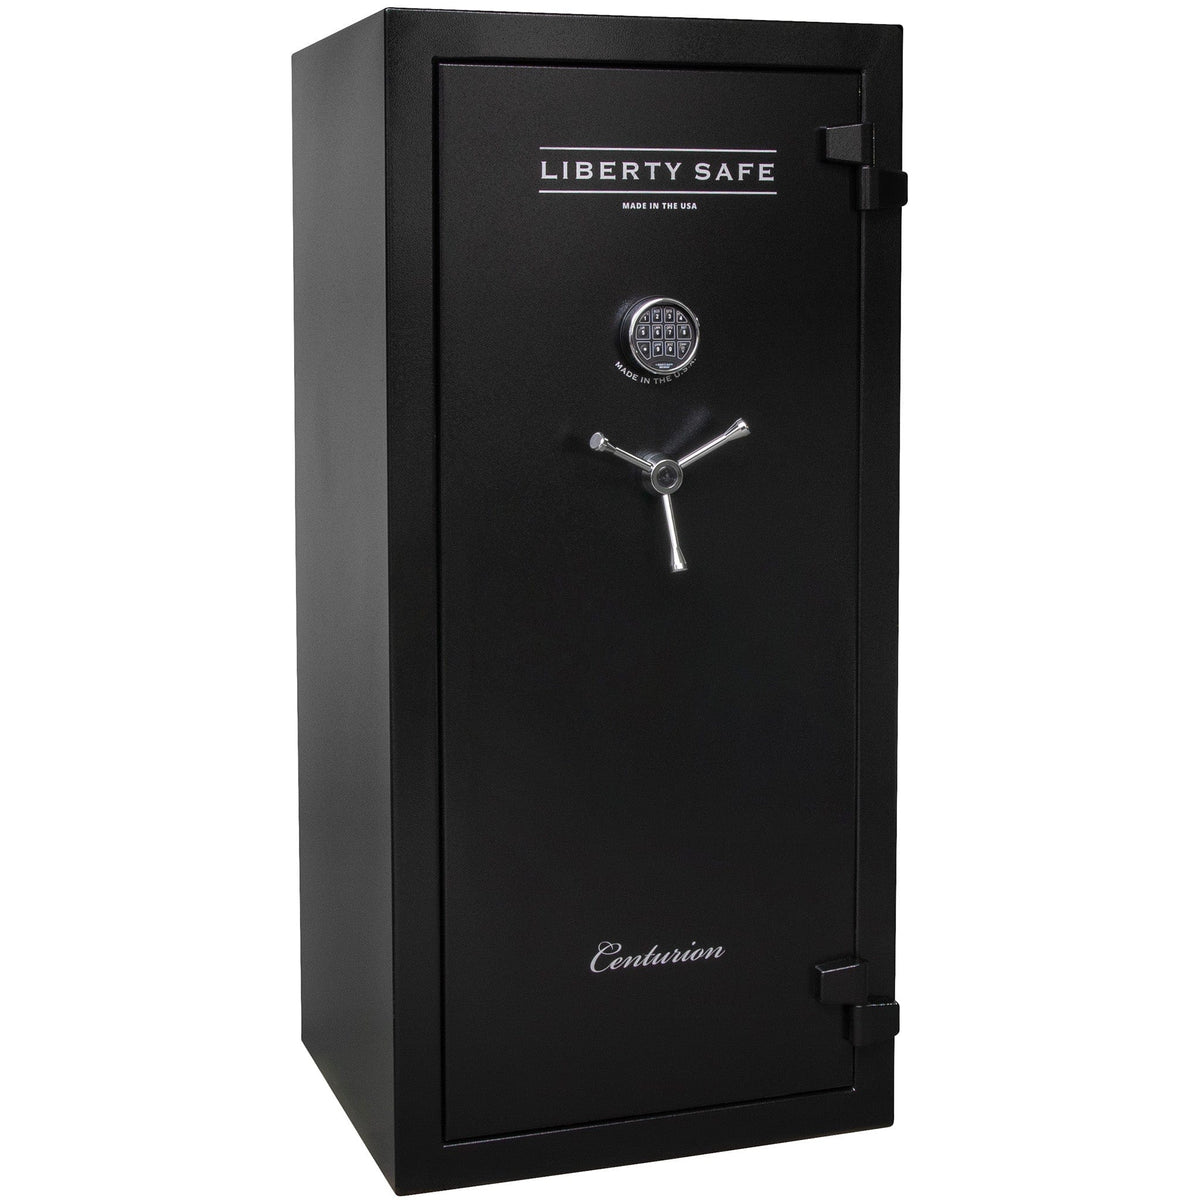 Centurion DLX | 32 | Level 1 Security | 40 Minute Fire Protection | $100 Factory Mail In Rebate